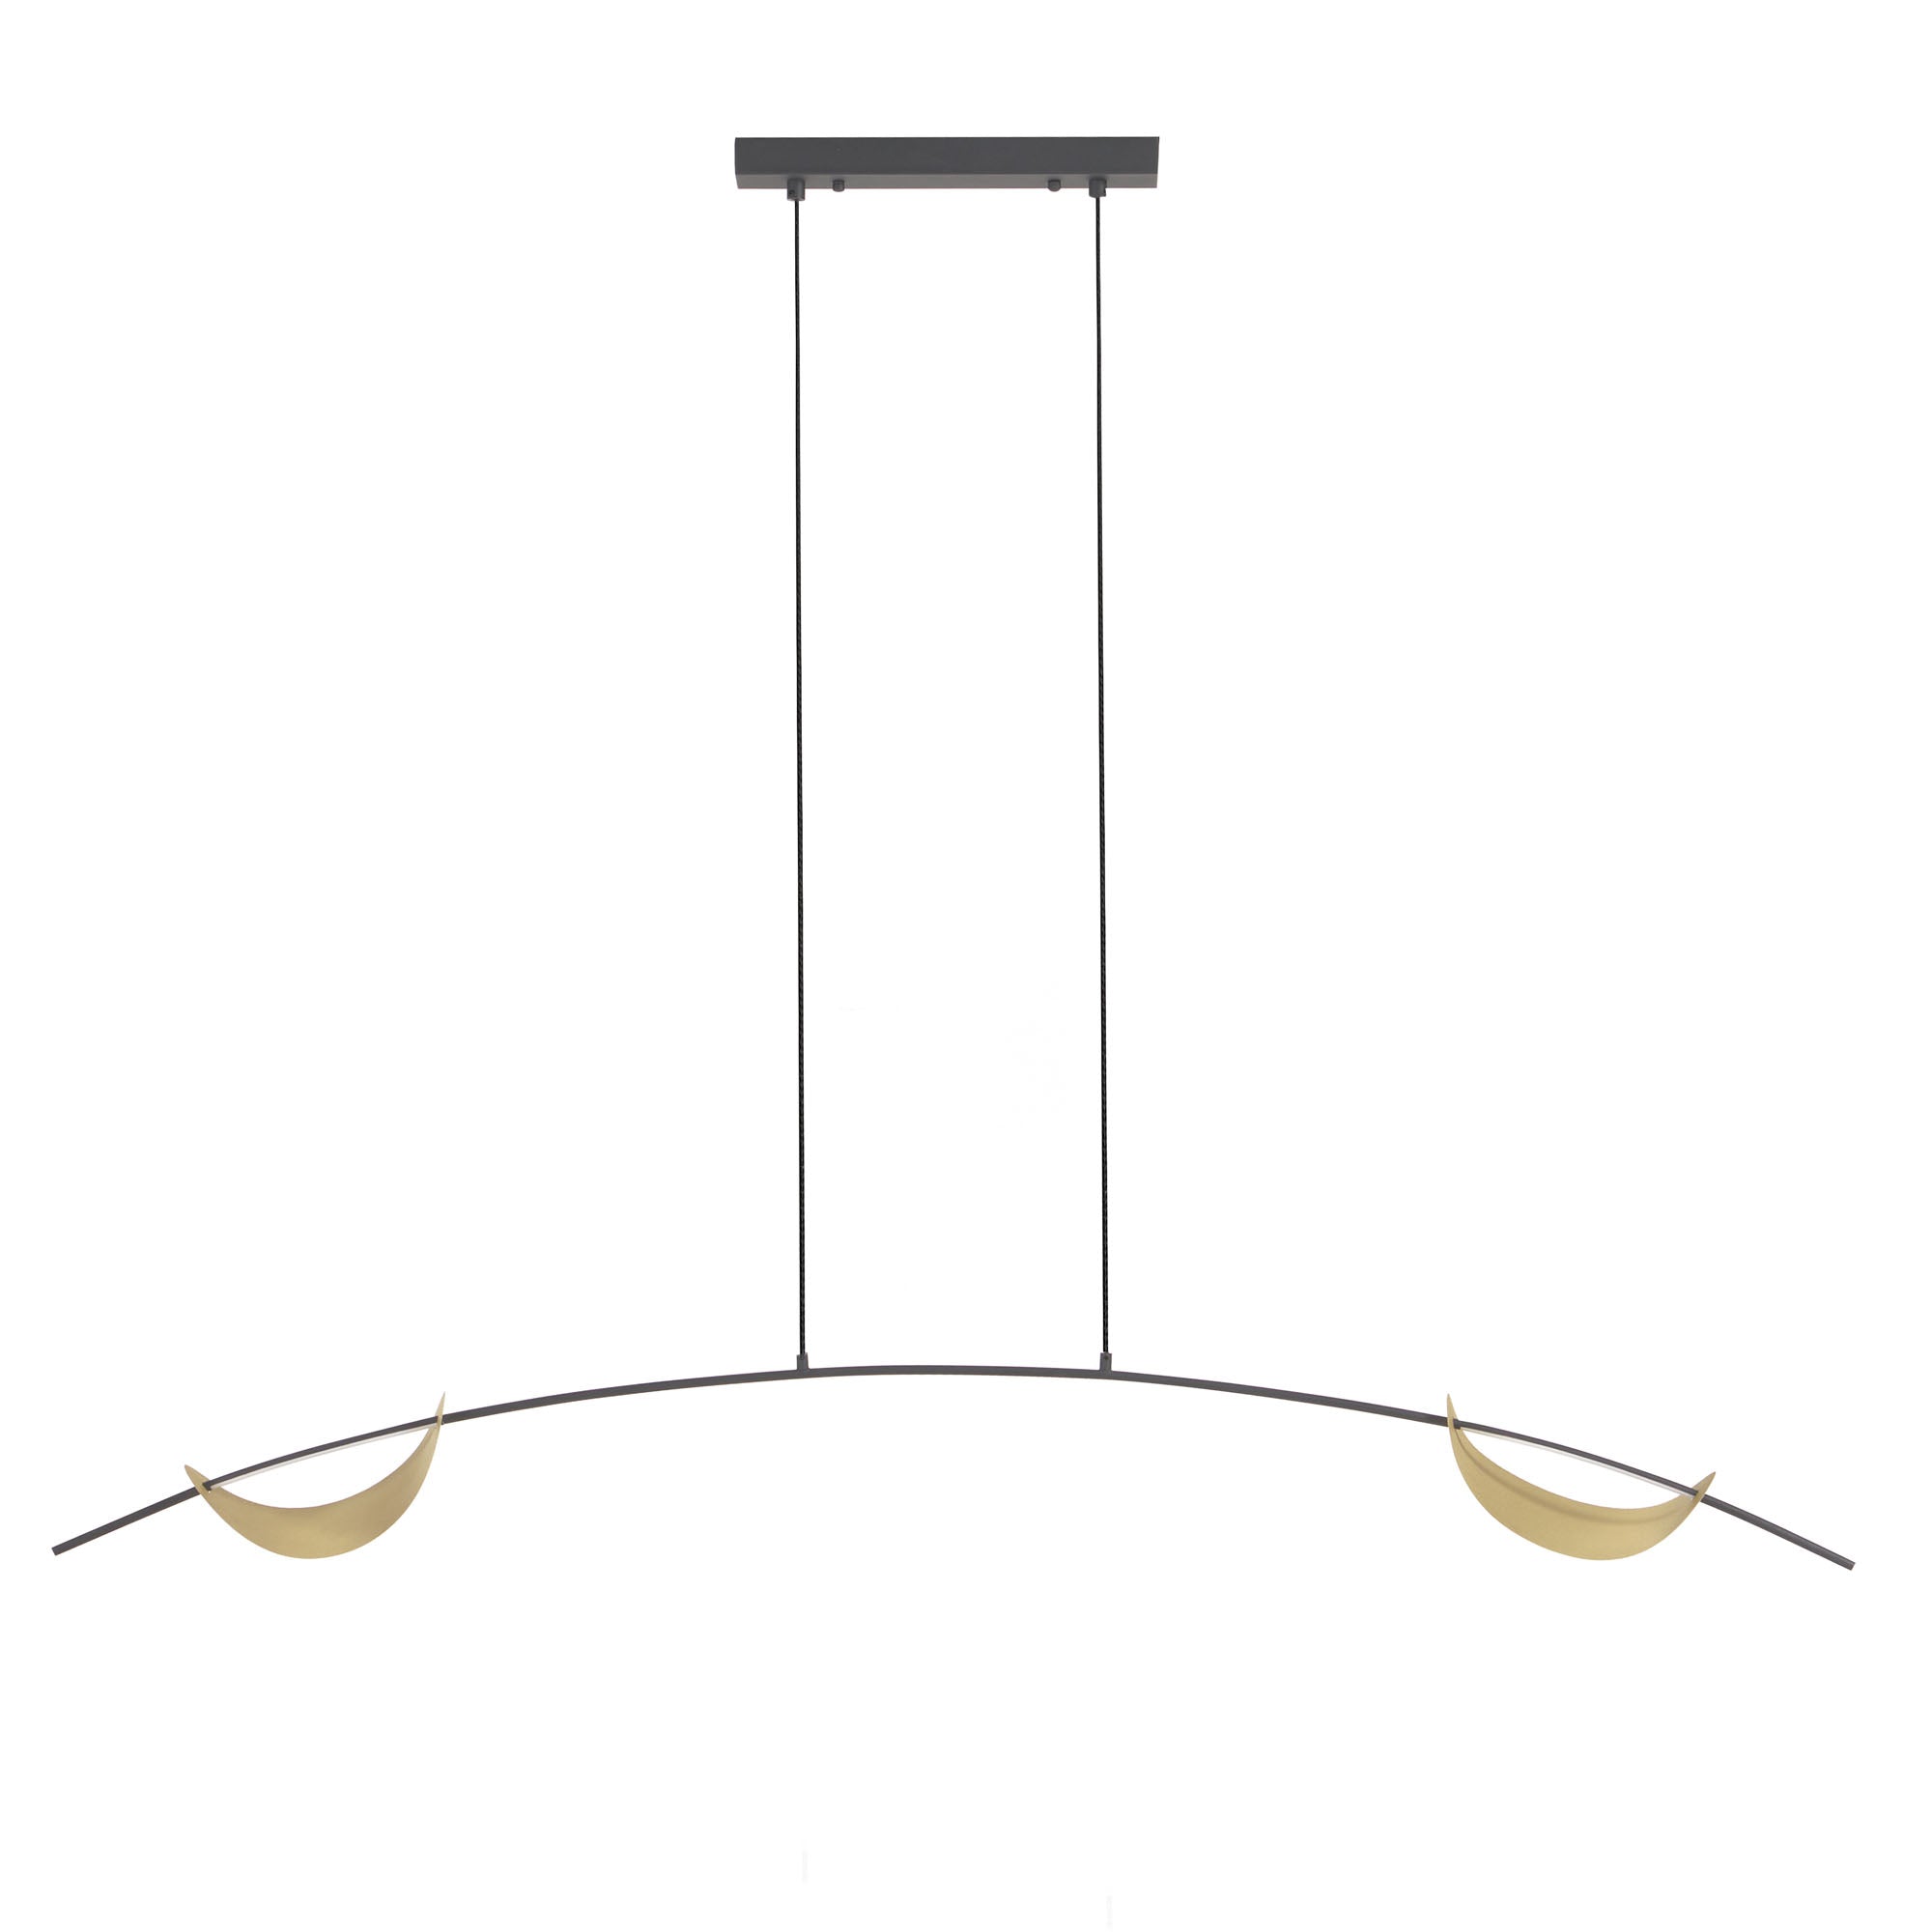 Anatolia metal ceiling light with black painted finish and gold-coloured detail